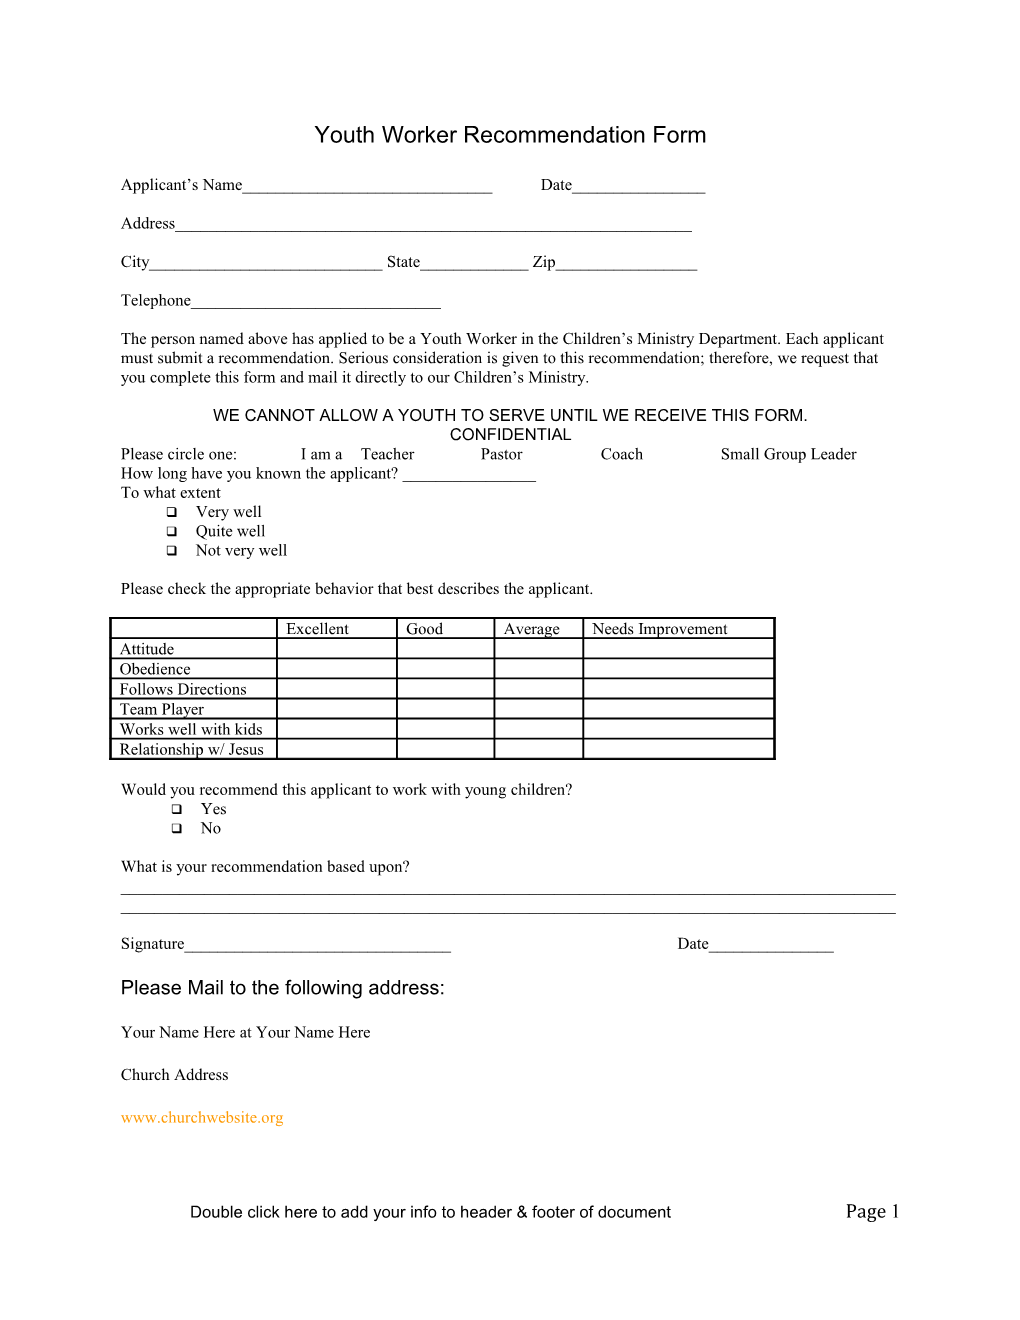 Youth Worker Recommendation Form